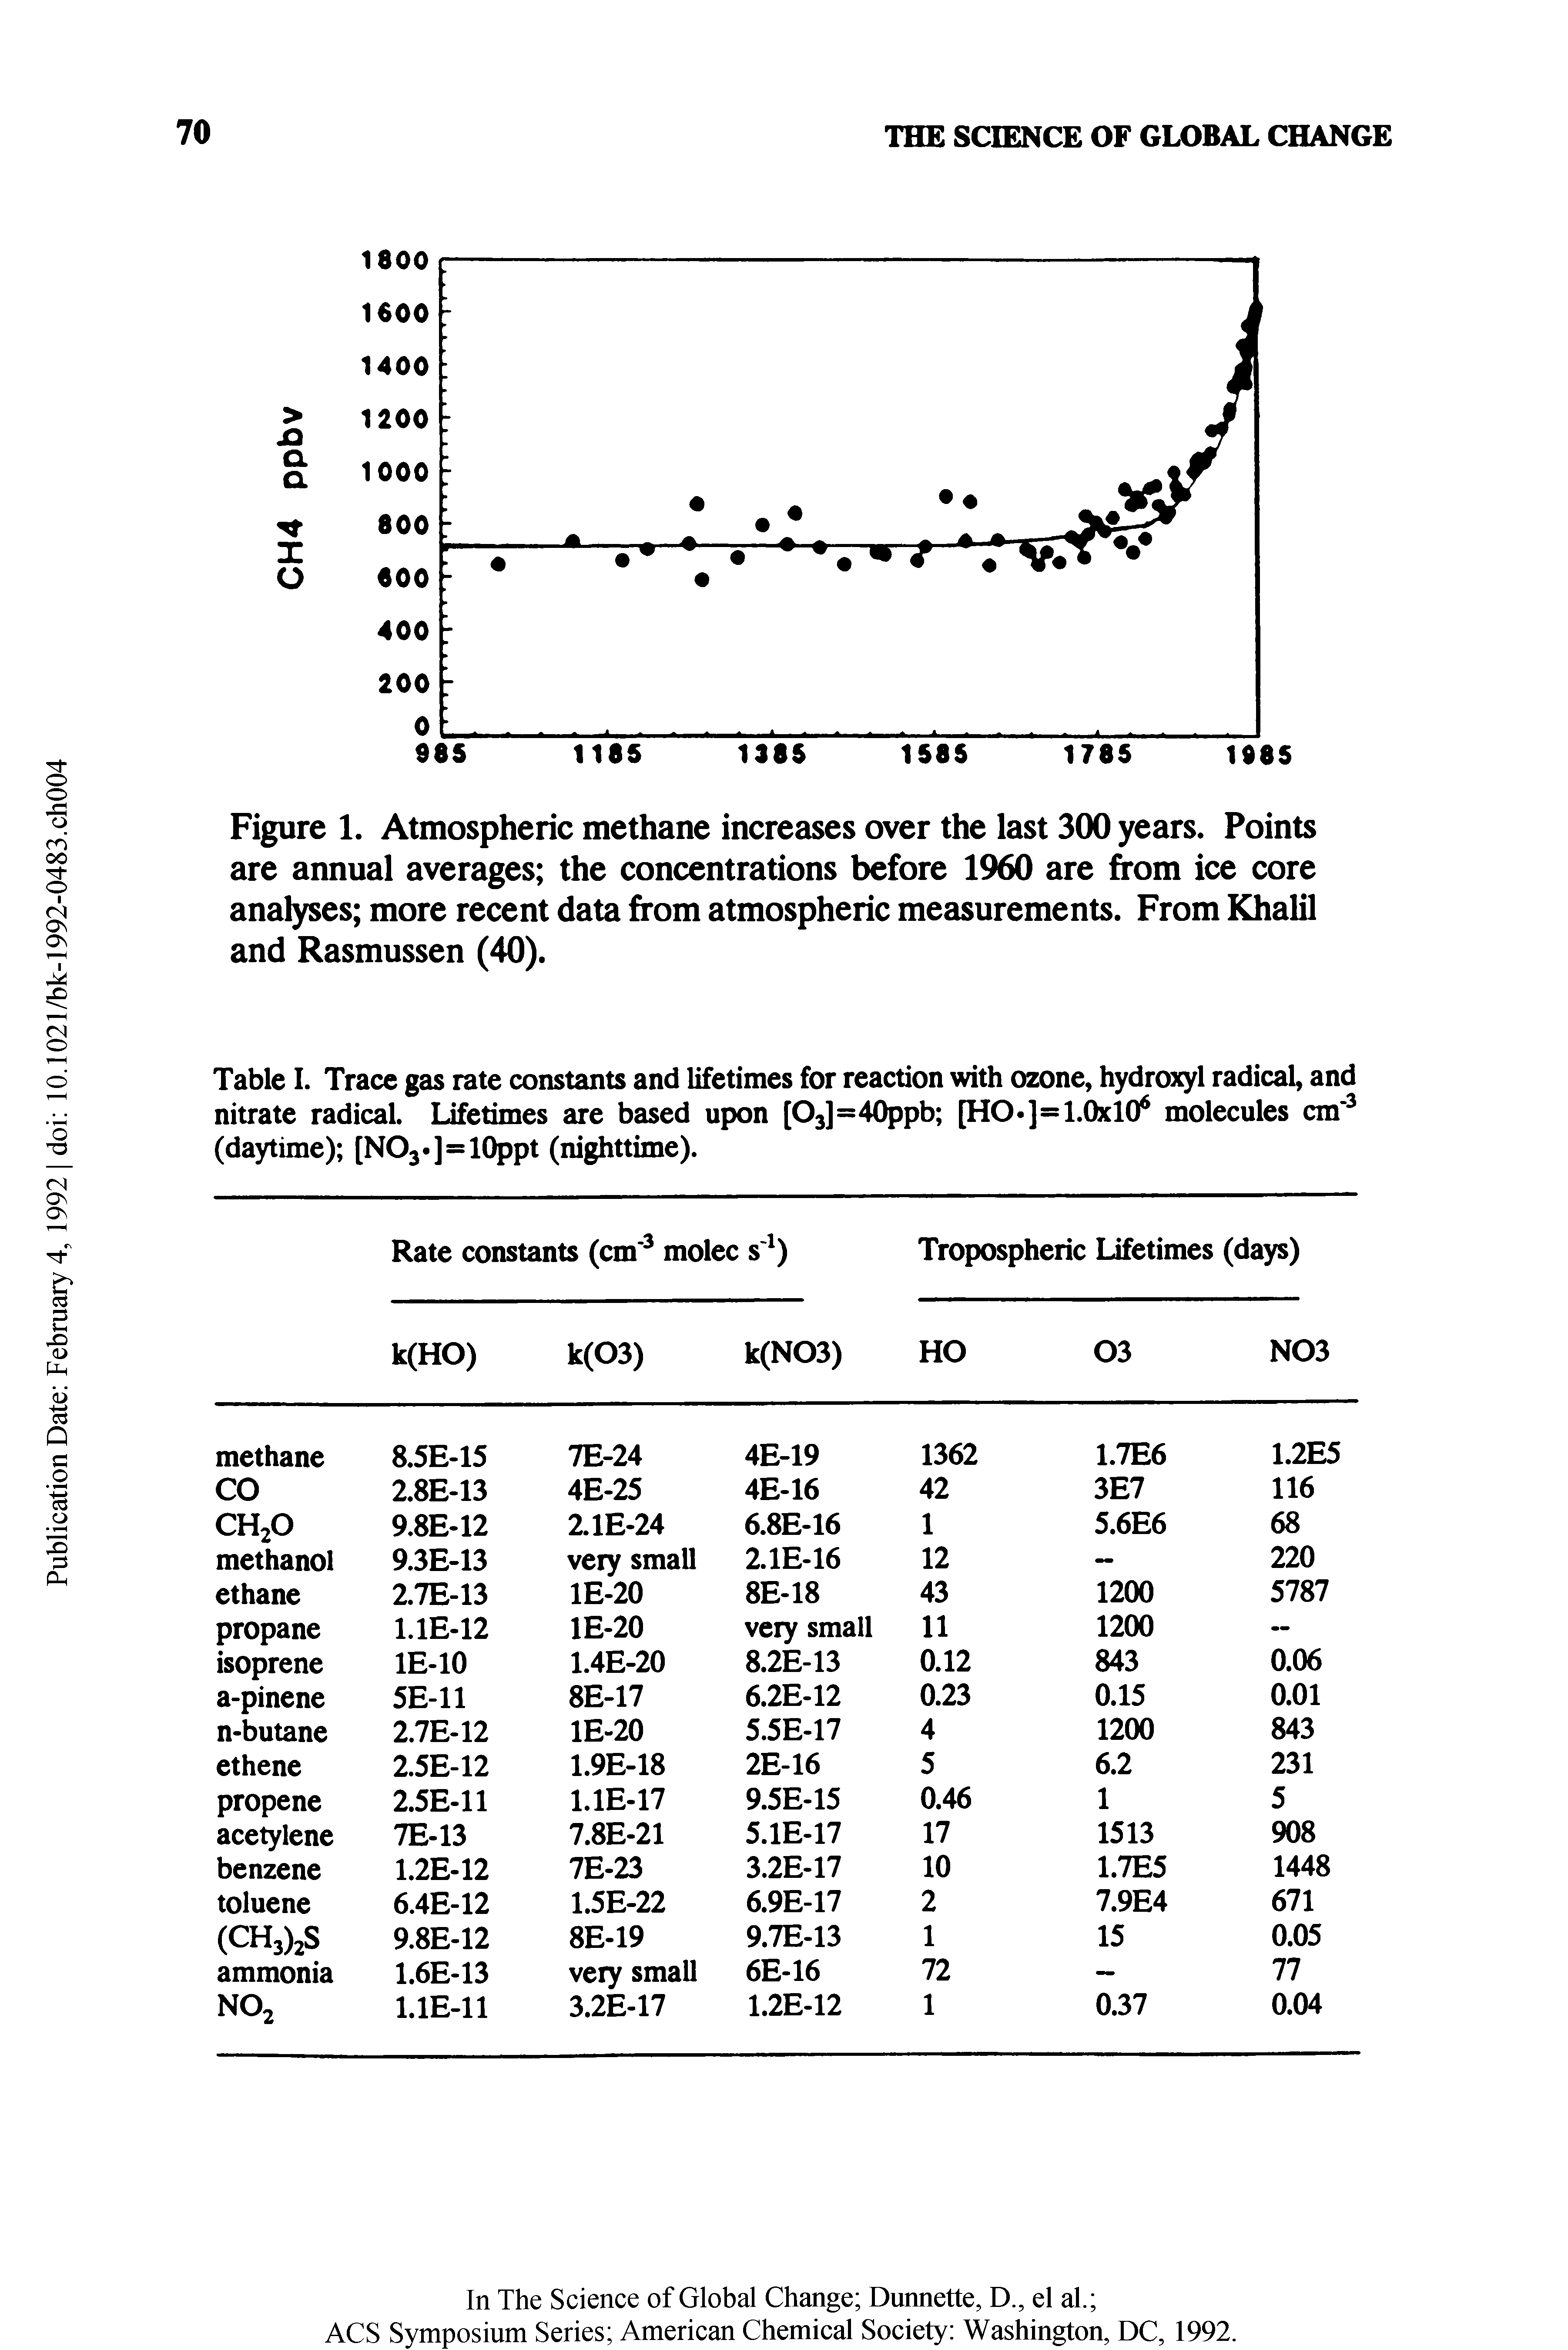 Figure 1. Atmospheric methane increases over the last 300 years. Points are annual averages the concentrations before 1960 are from ice core analyses more recent data from atmospheric measurements. From Khalil and Rasmussen (40).